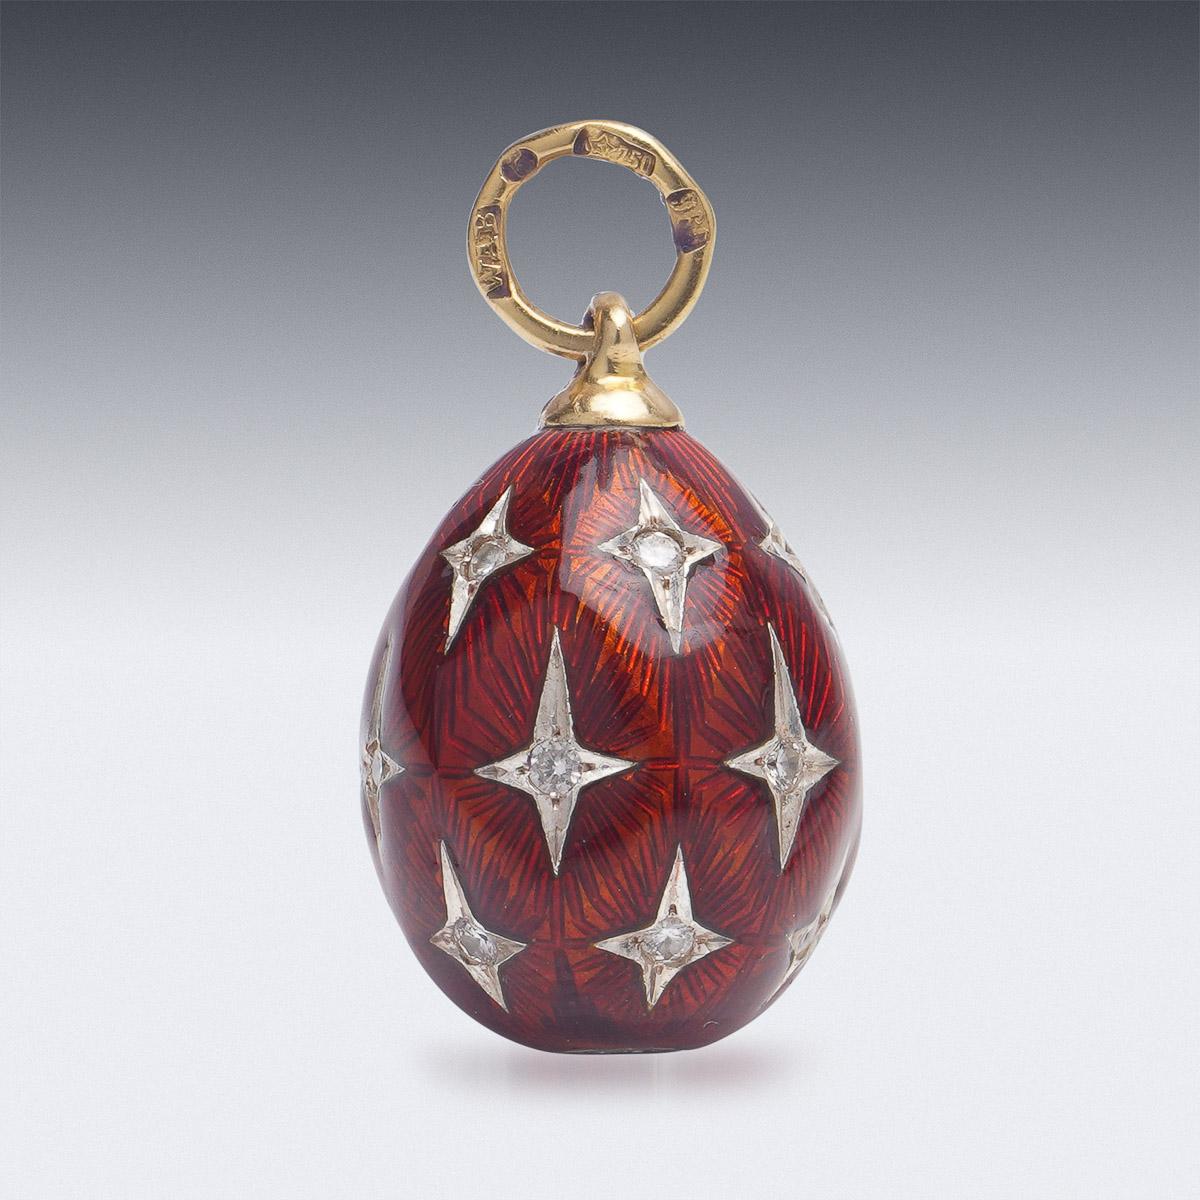 20th Century Imperial Russian jewelled gold & guilloché enamel egg pendant, enamelled in translucent red on guilloche ground and set with old cut diamonds.
Hallmarked with Russian gold mark, St-Petersburg, with later soviet gold mark (750